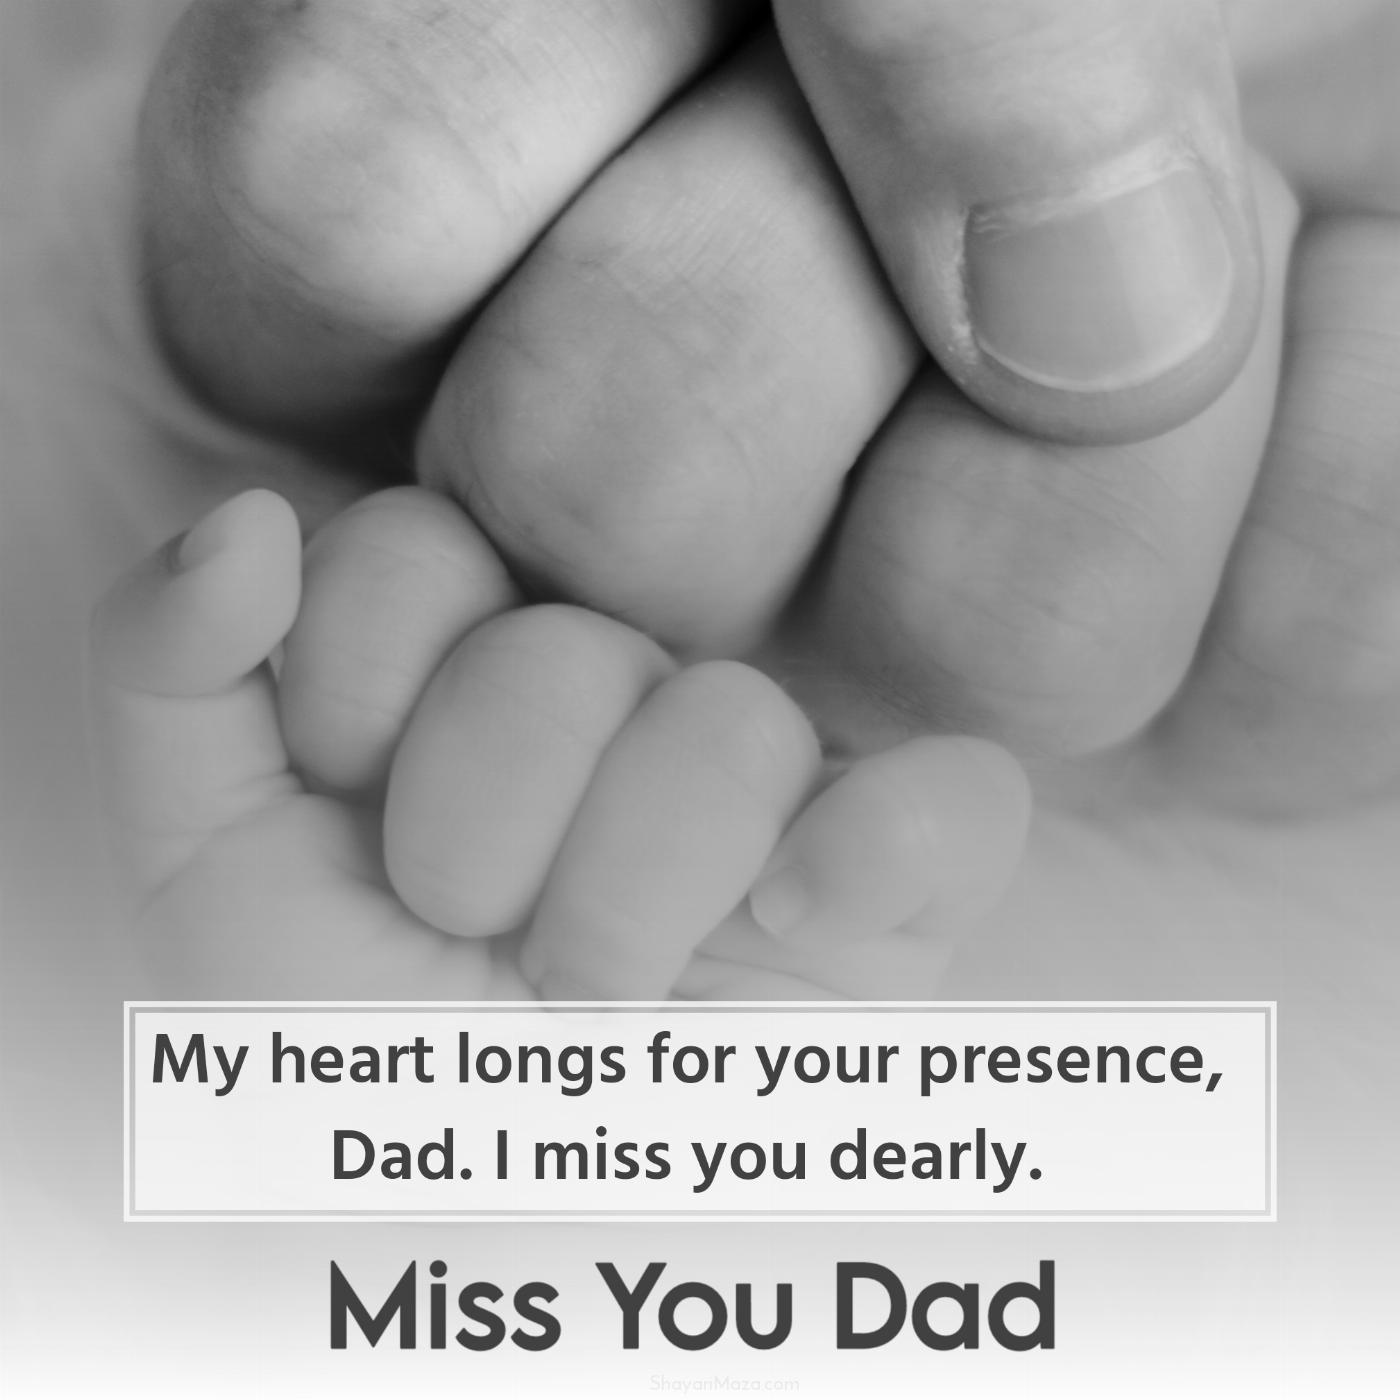 My heart longs for your presence Dad